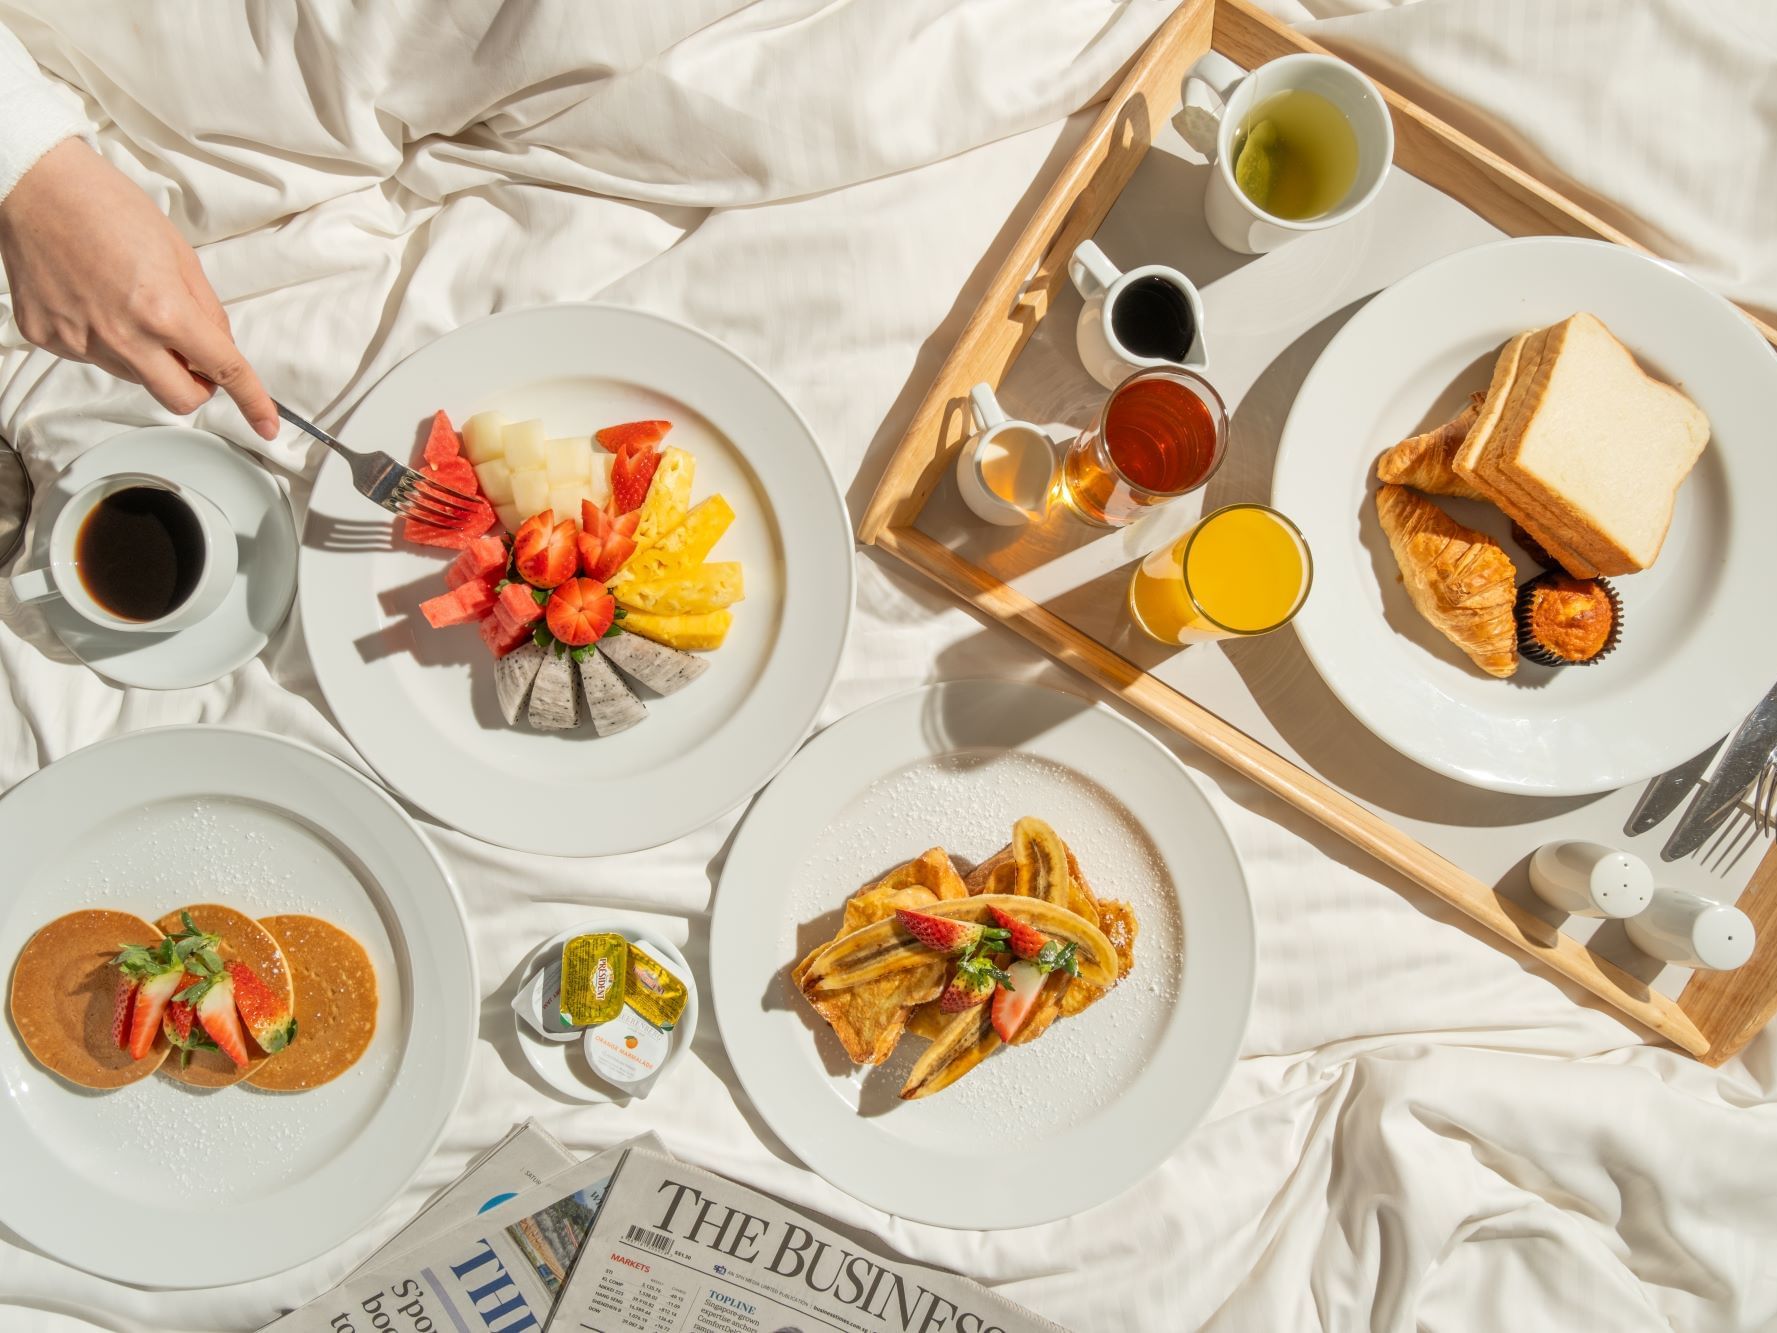 A tray of breakfast meals served on a bed at Carlton Hotel Singapore